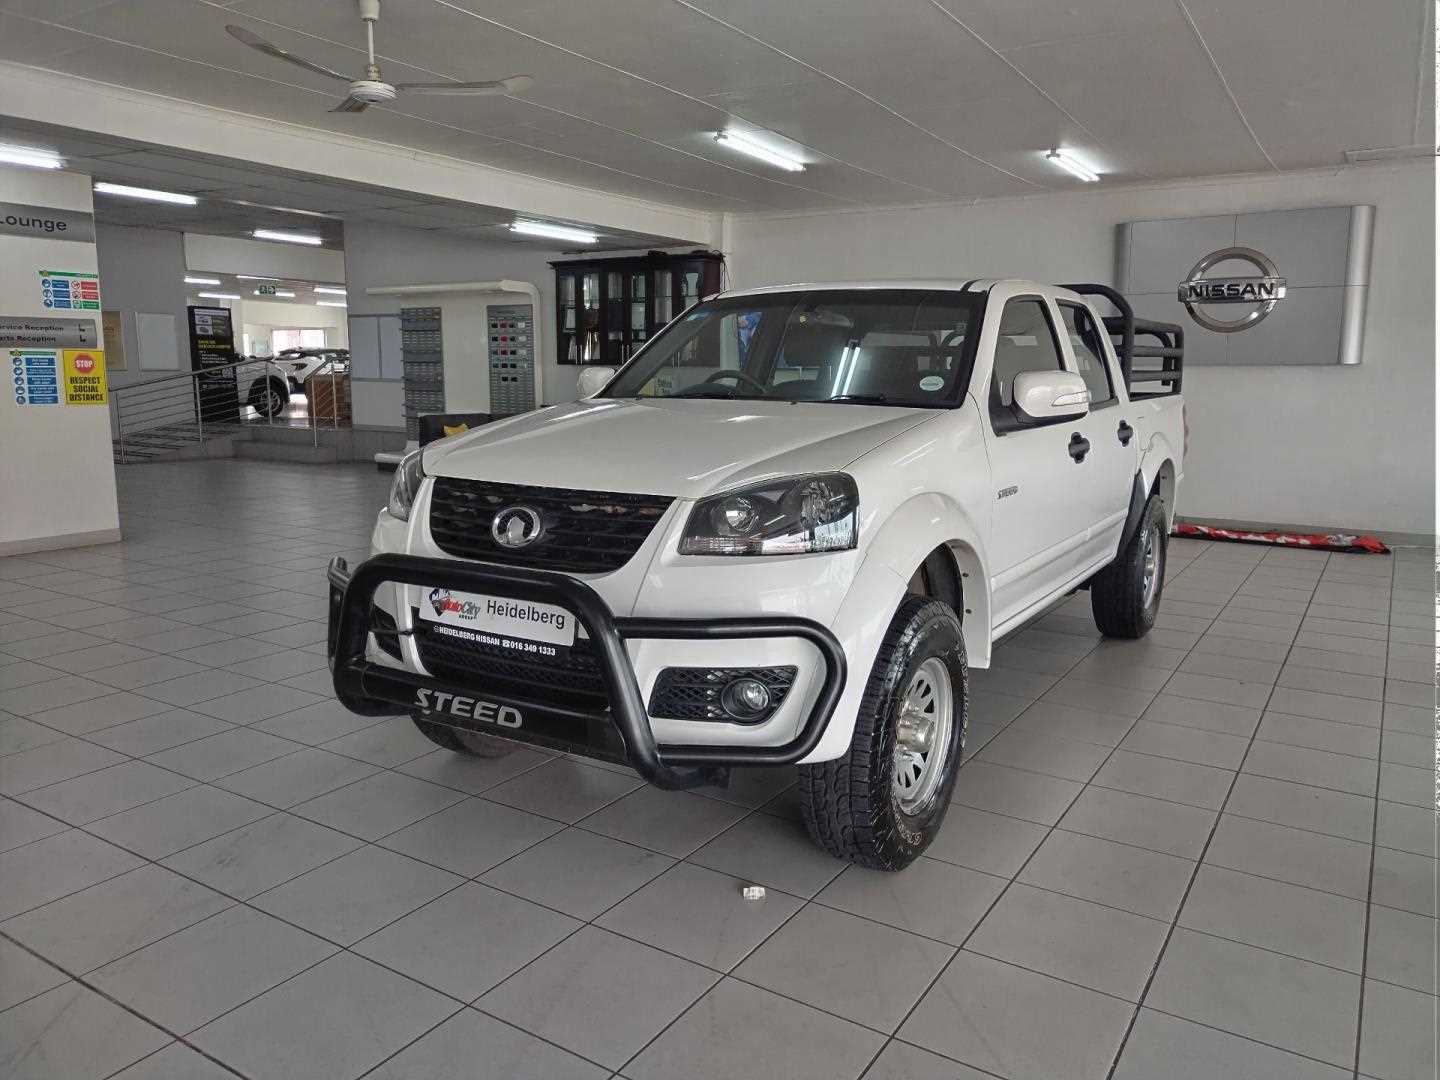 2019 Gwm Steed 5 2.0 Vgt 4X4 D/cab Sx for sale - 337480